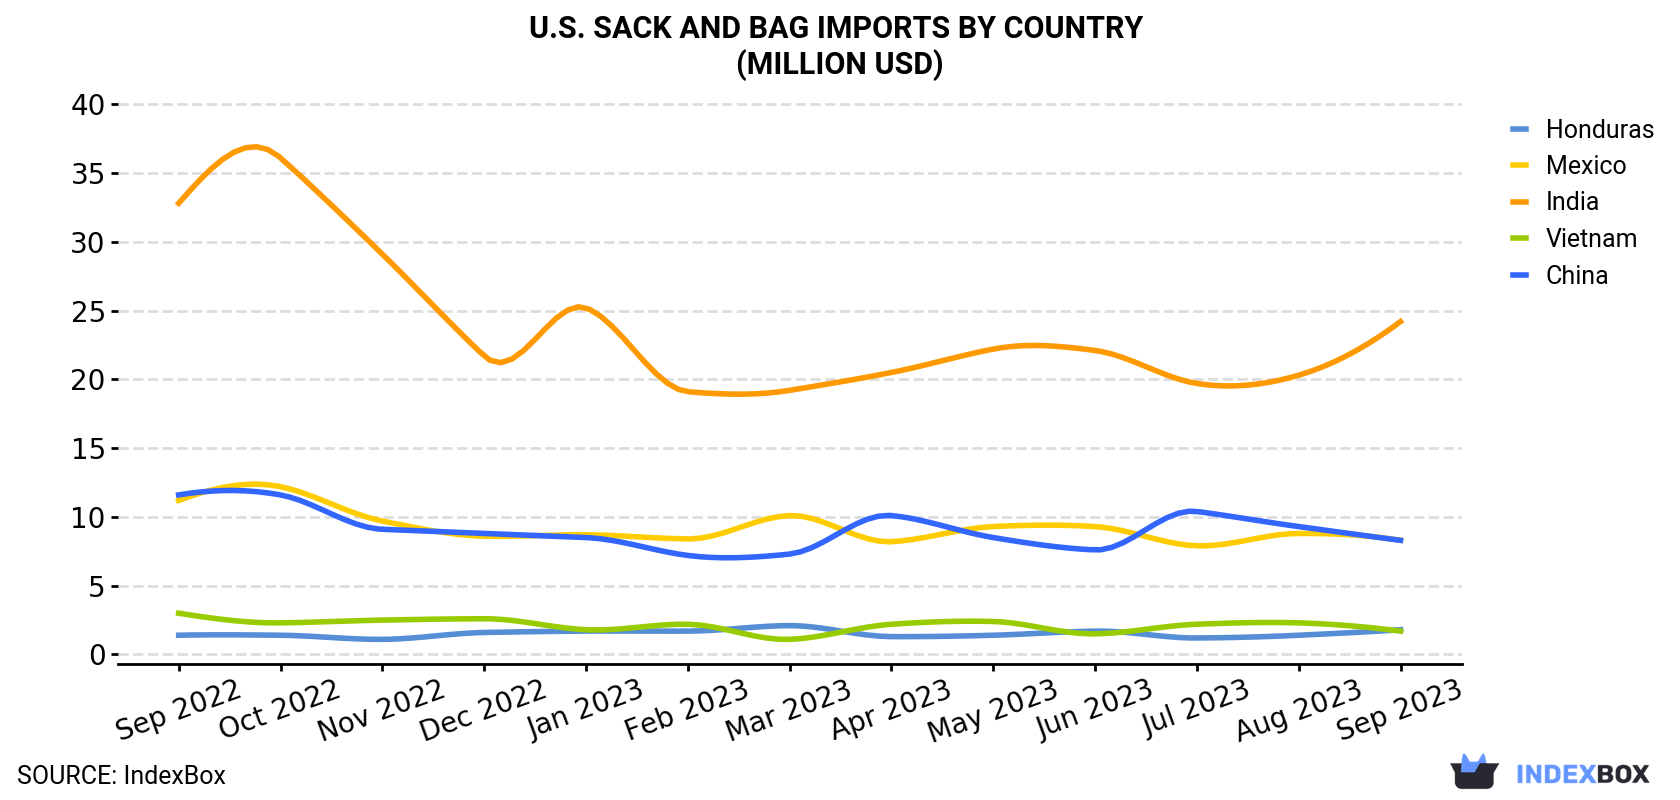 U.S. Sack And Bag Imports By Country (Million USD)